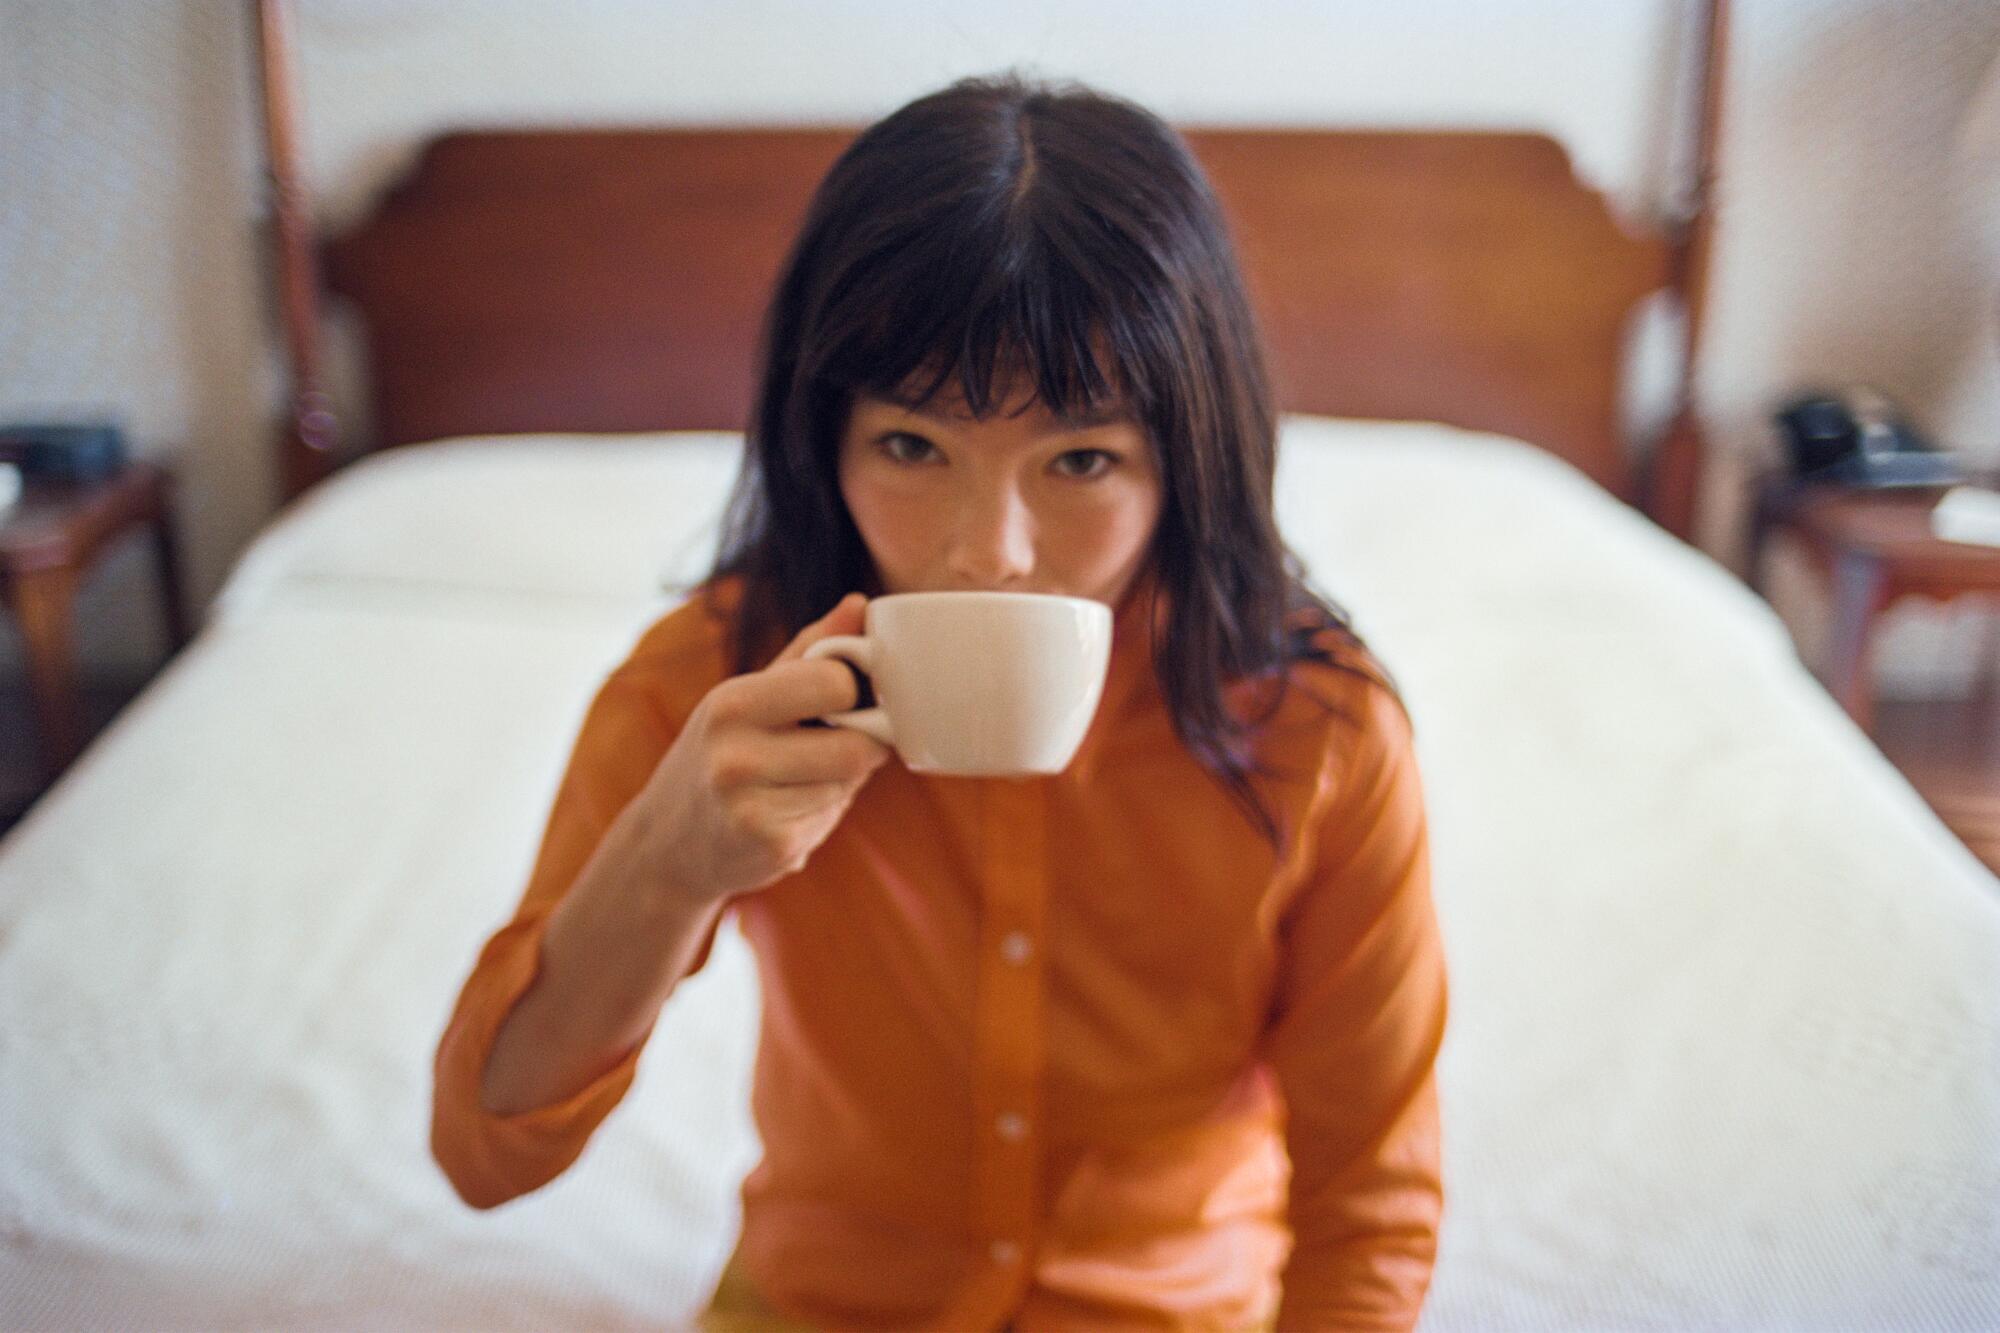 Bj?rk sits on the edge of a bed, wearing an orange sweater and drinking from a white coffee cup.